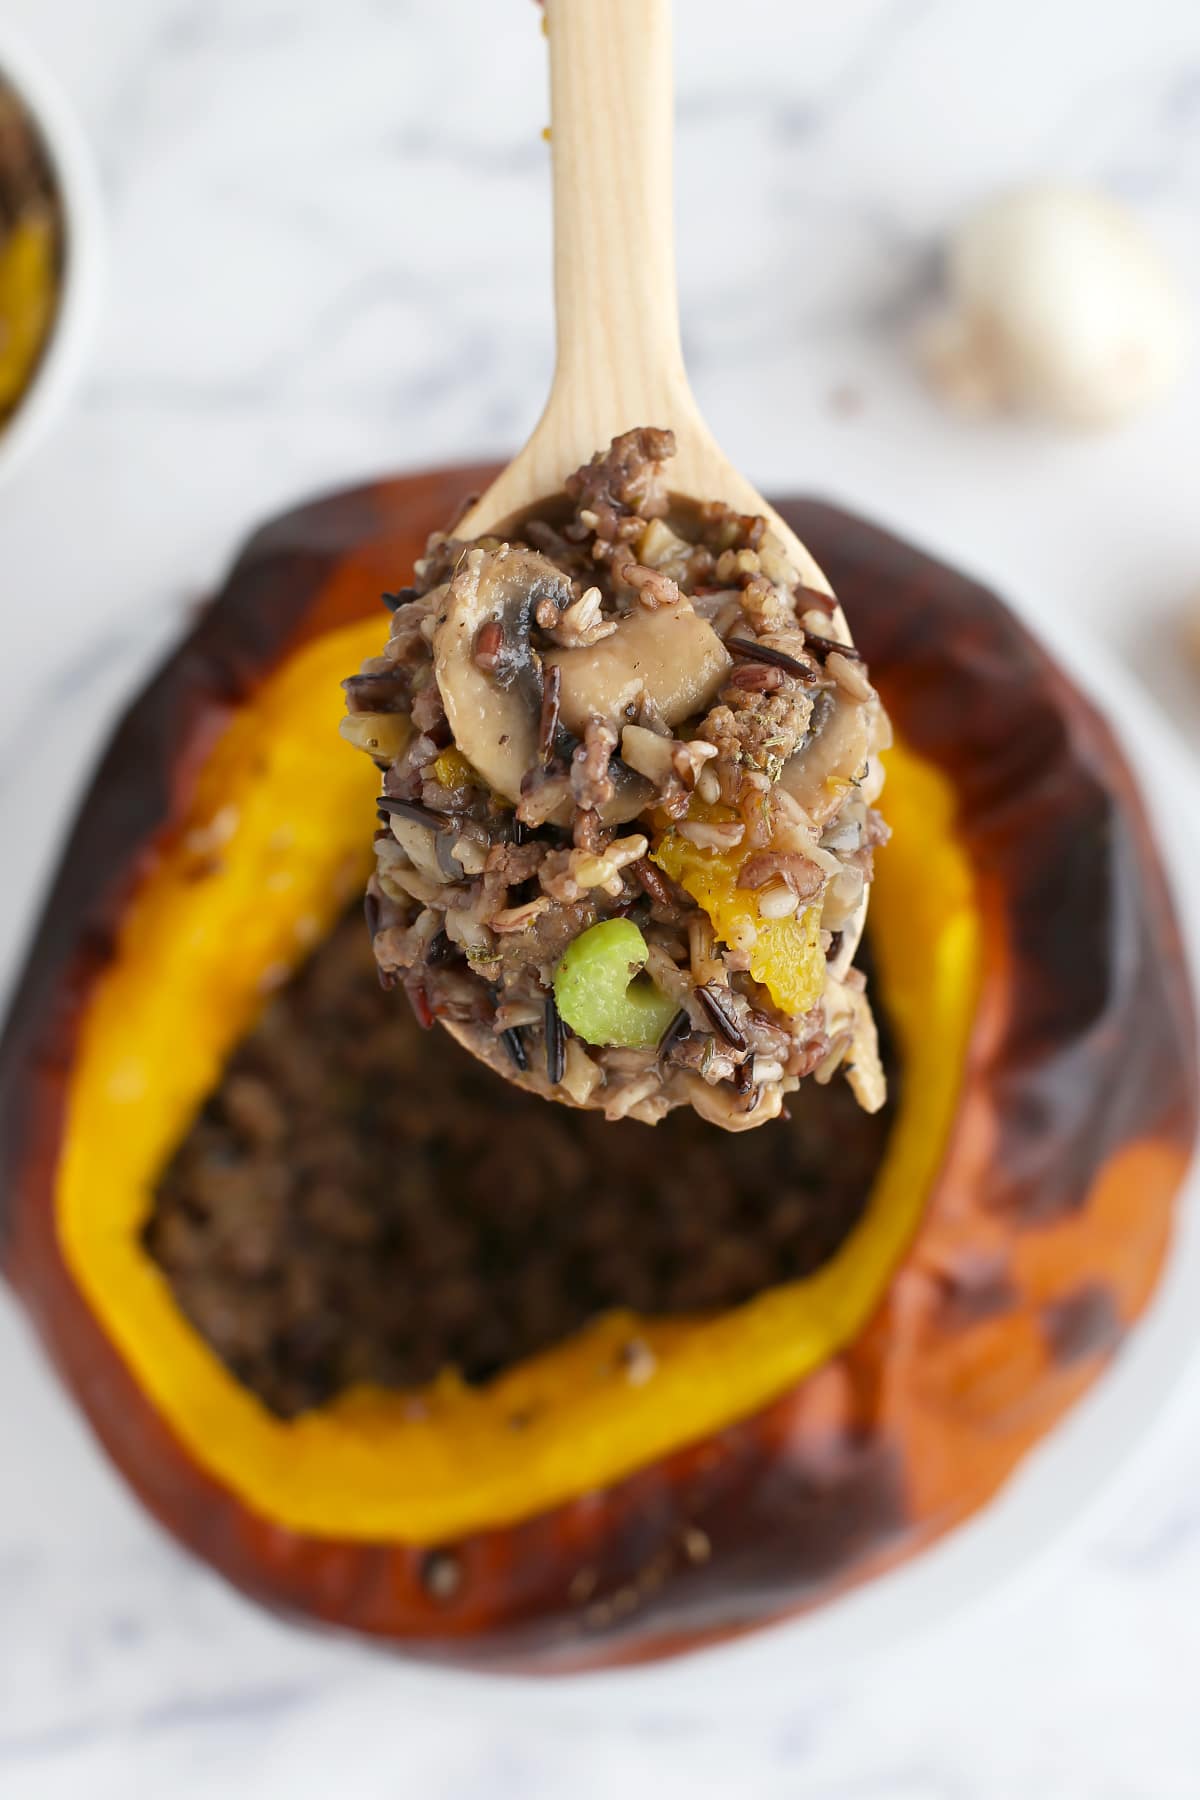 Baked pumpkin stuffed with rice, ground beef, mushrooms and celery scooped out with a wooden spoon.